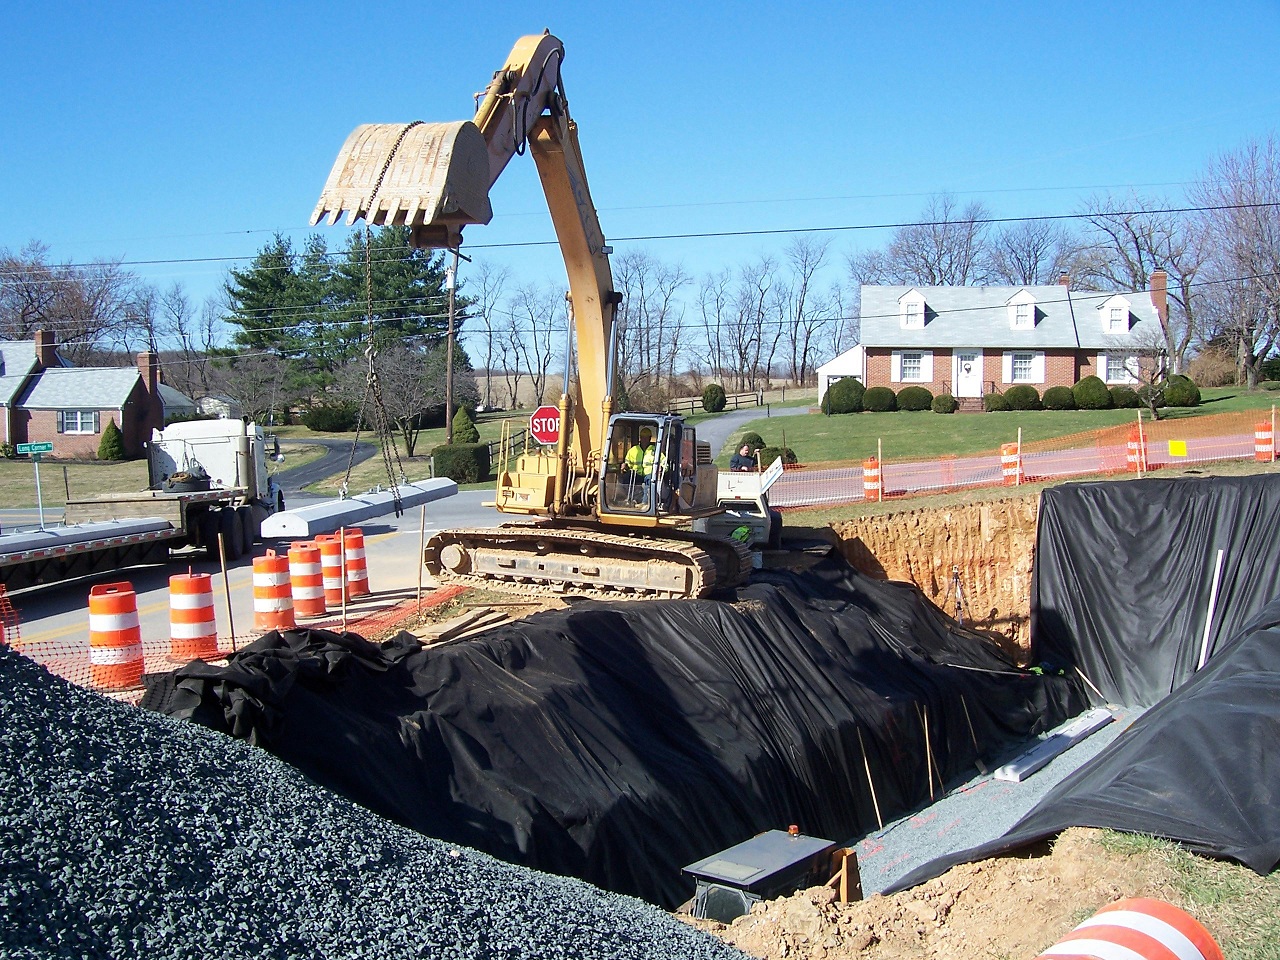 using a backhoe to dig the hole for an underground storage tank